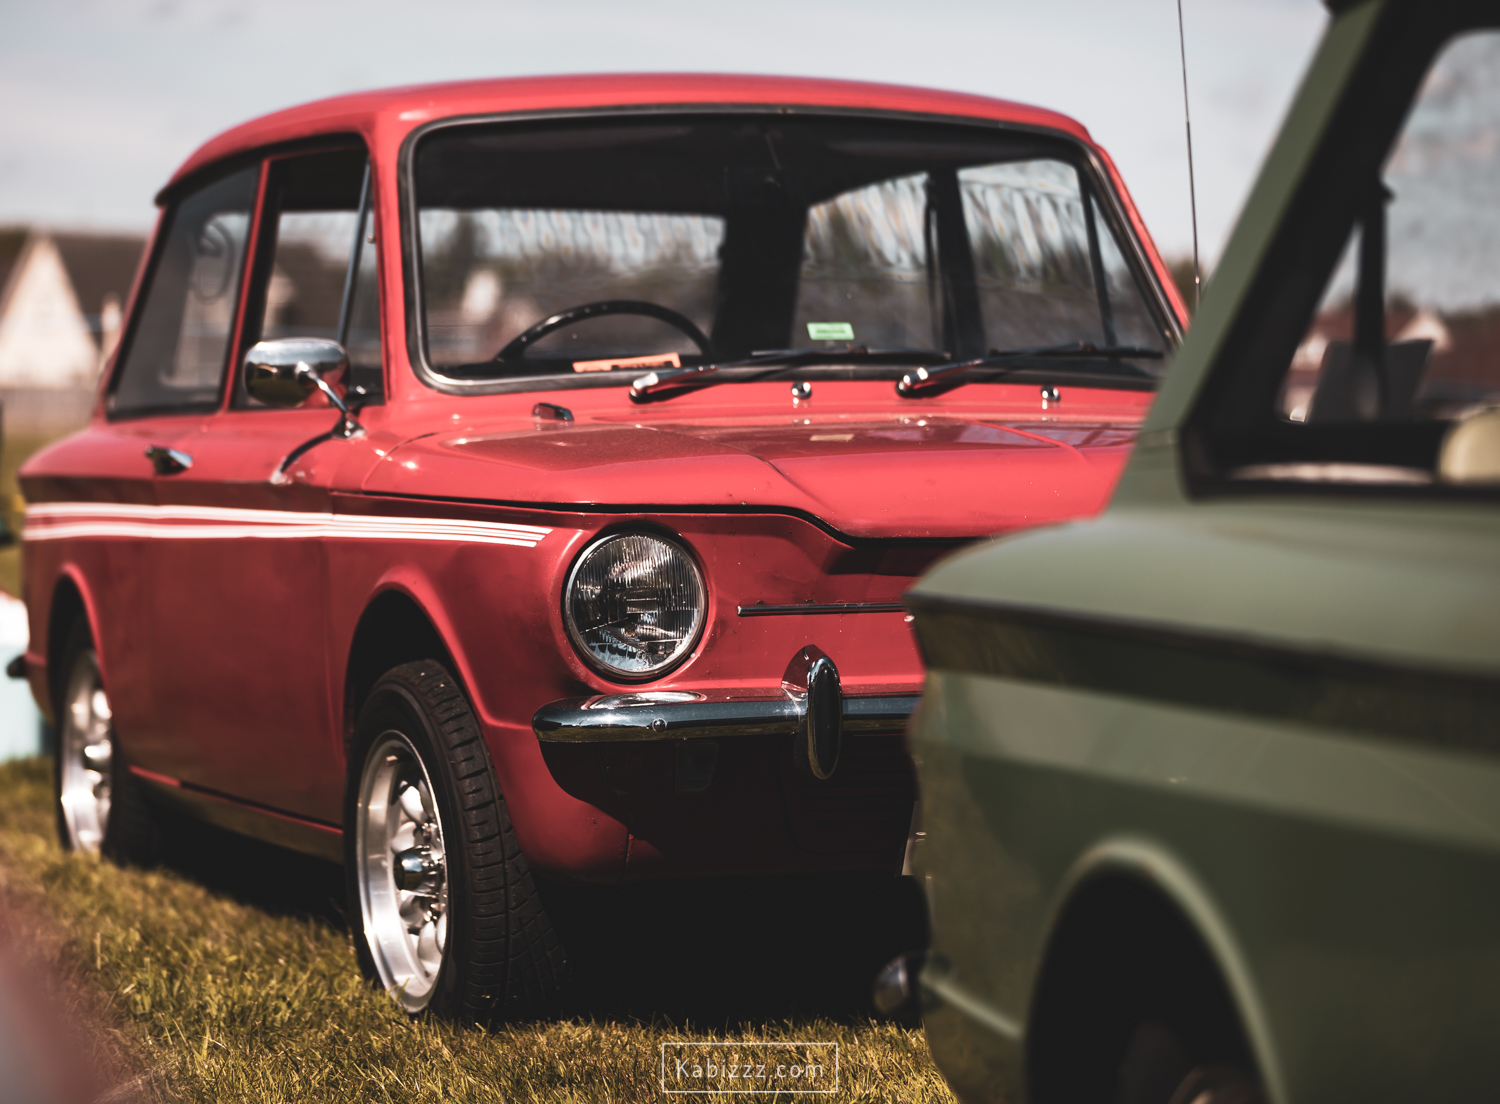 Kabizzz_Photography_Stirling_District_Classic _cars-31.jpg